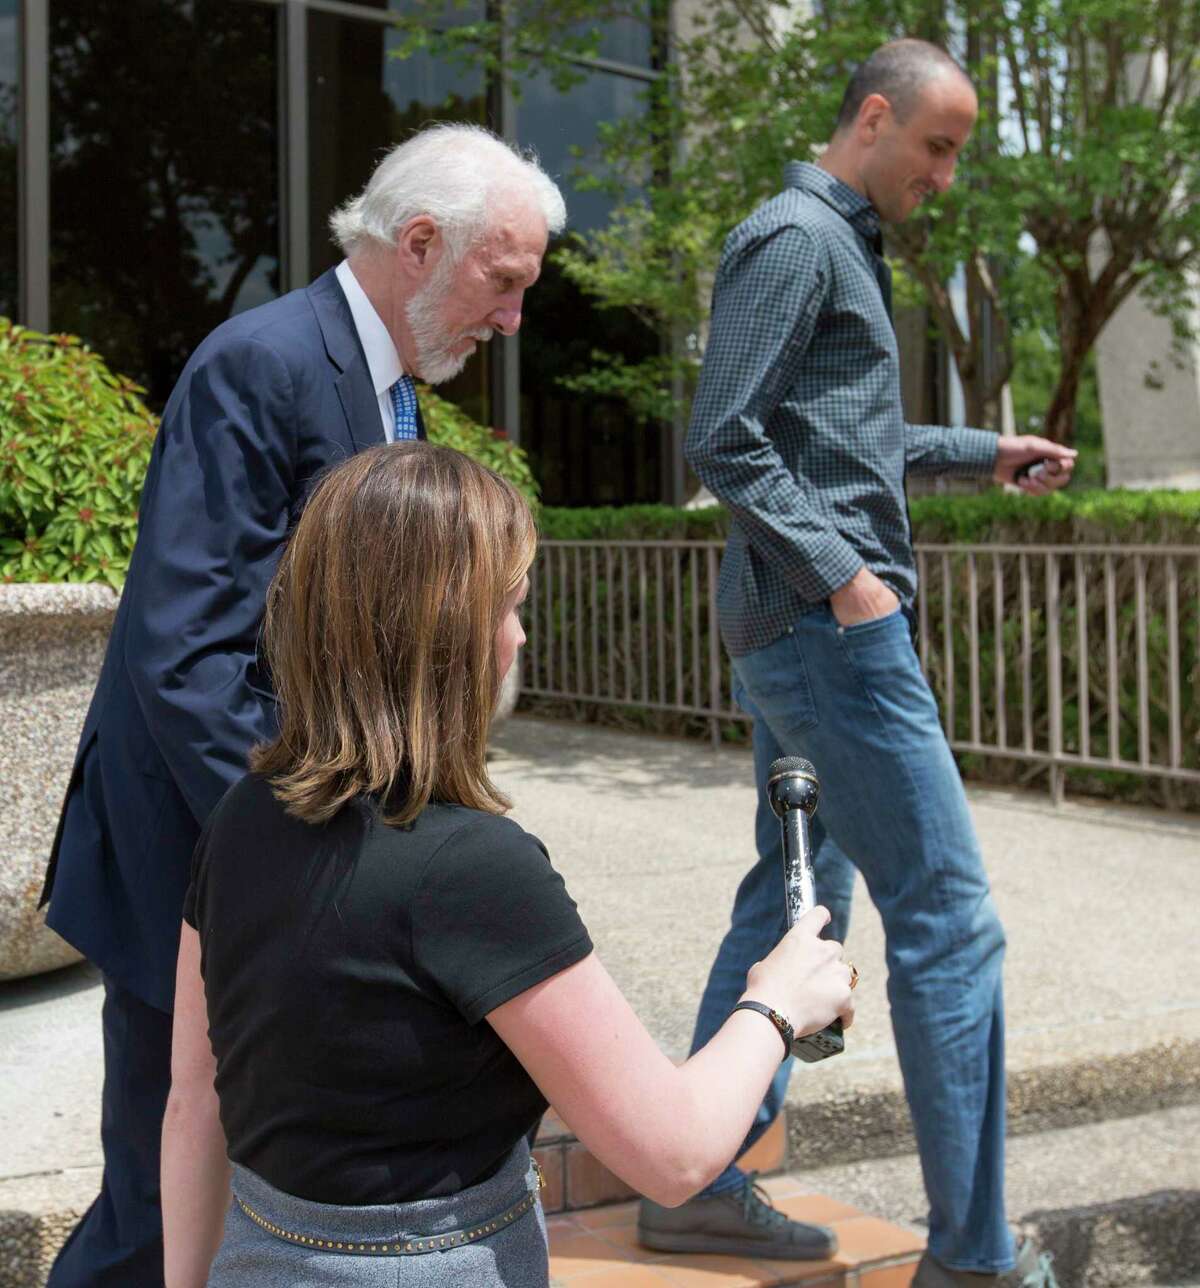 Spurs coach Gregg Popovich, left, and player Manu Ginobili skirt around reporters as they leave the federal courthouse in San Antonio Tuesday, June 27, 2017 after attending a sentencing hearing in Tim Duncan's legal case against Duncan's former financial adviser Charles Banks.